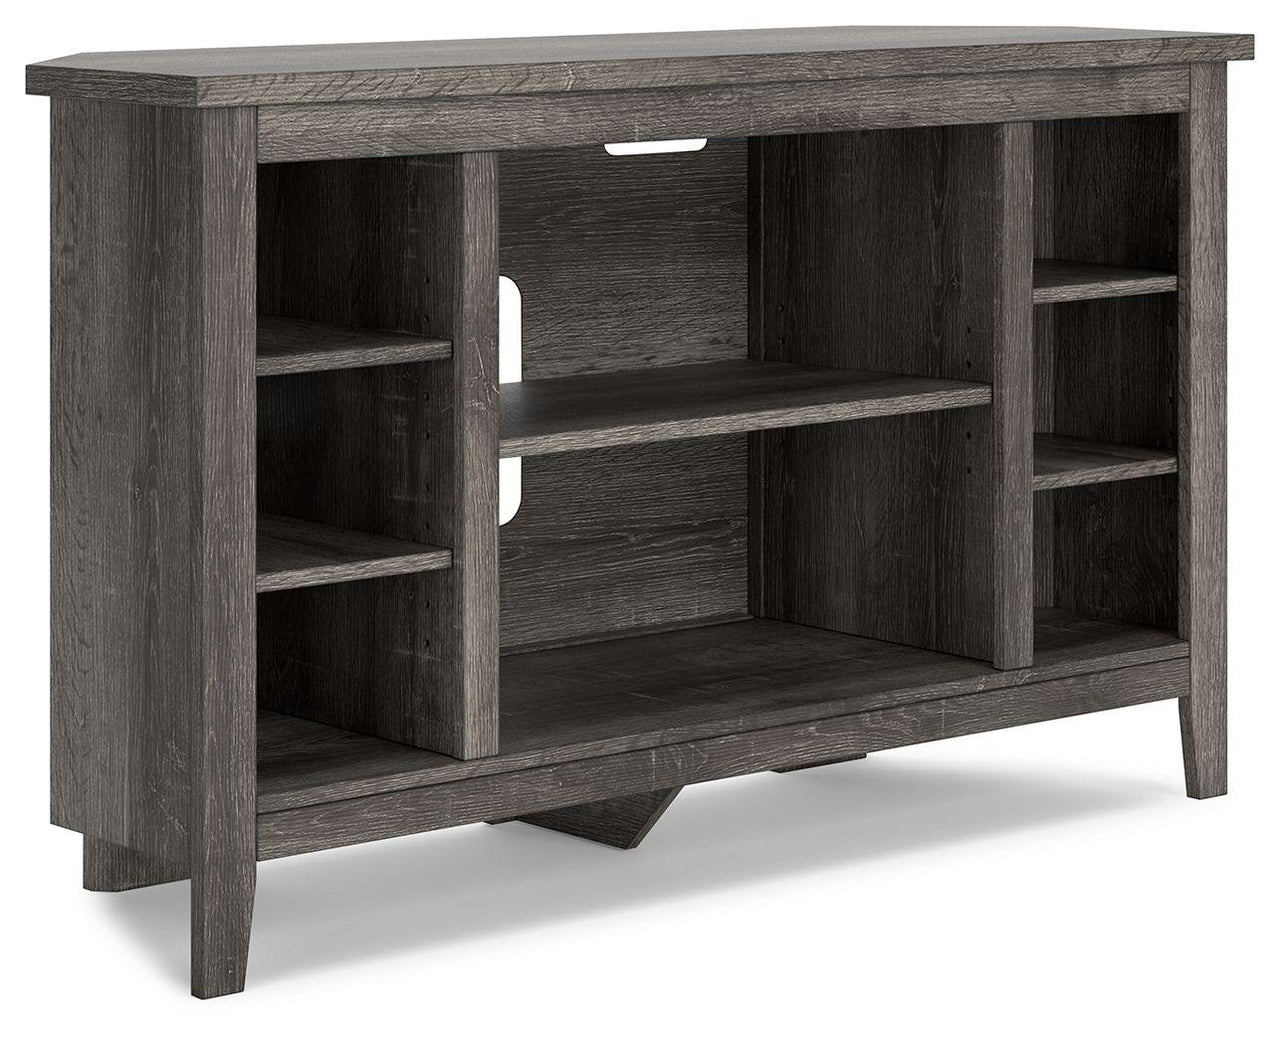 Arlenbry - Gray - Corner TV Stand/Fireplace Opt Tony's Home Furnishings Furniture. Beds. Dressers. Sofas.